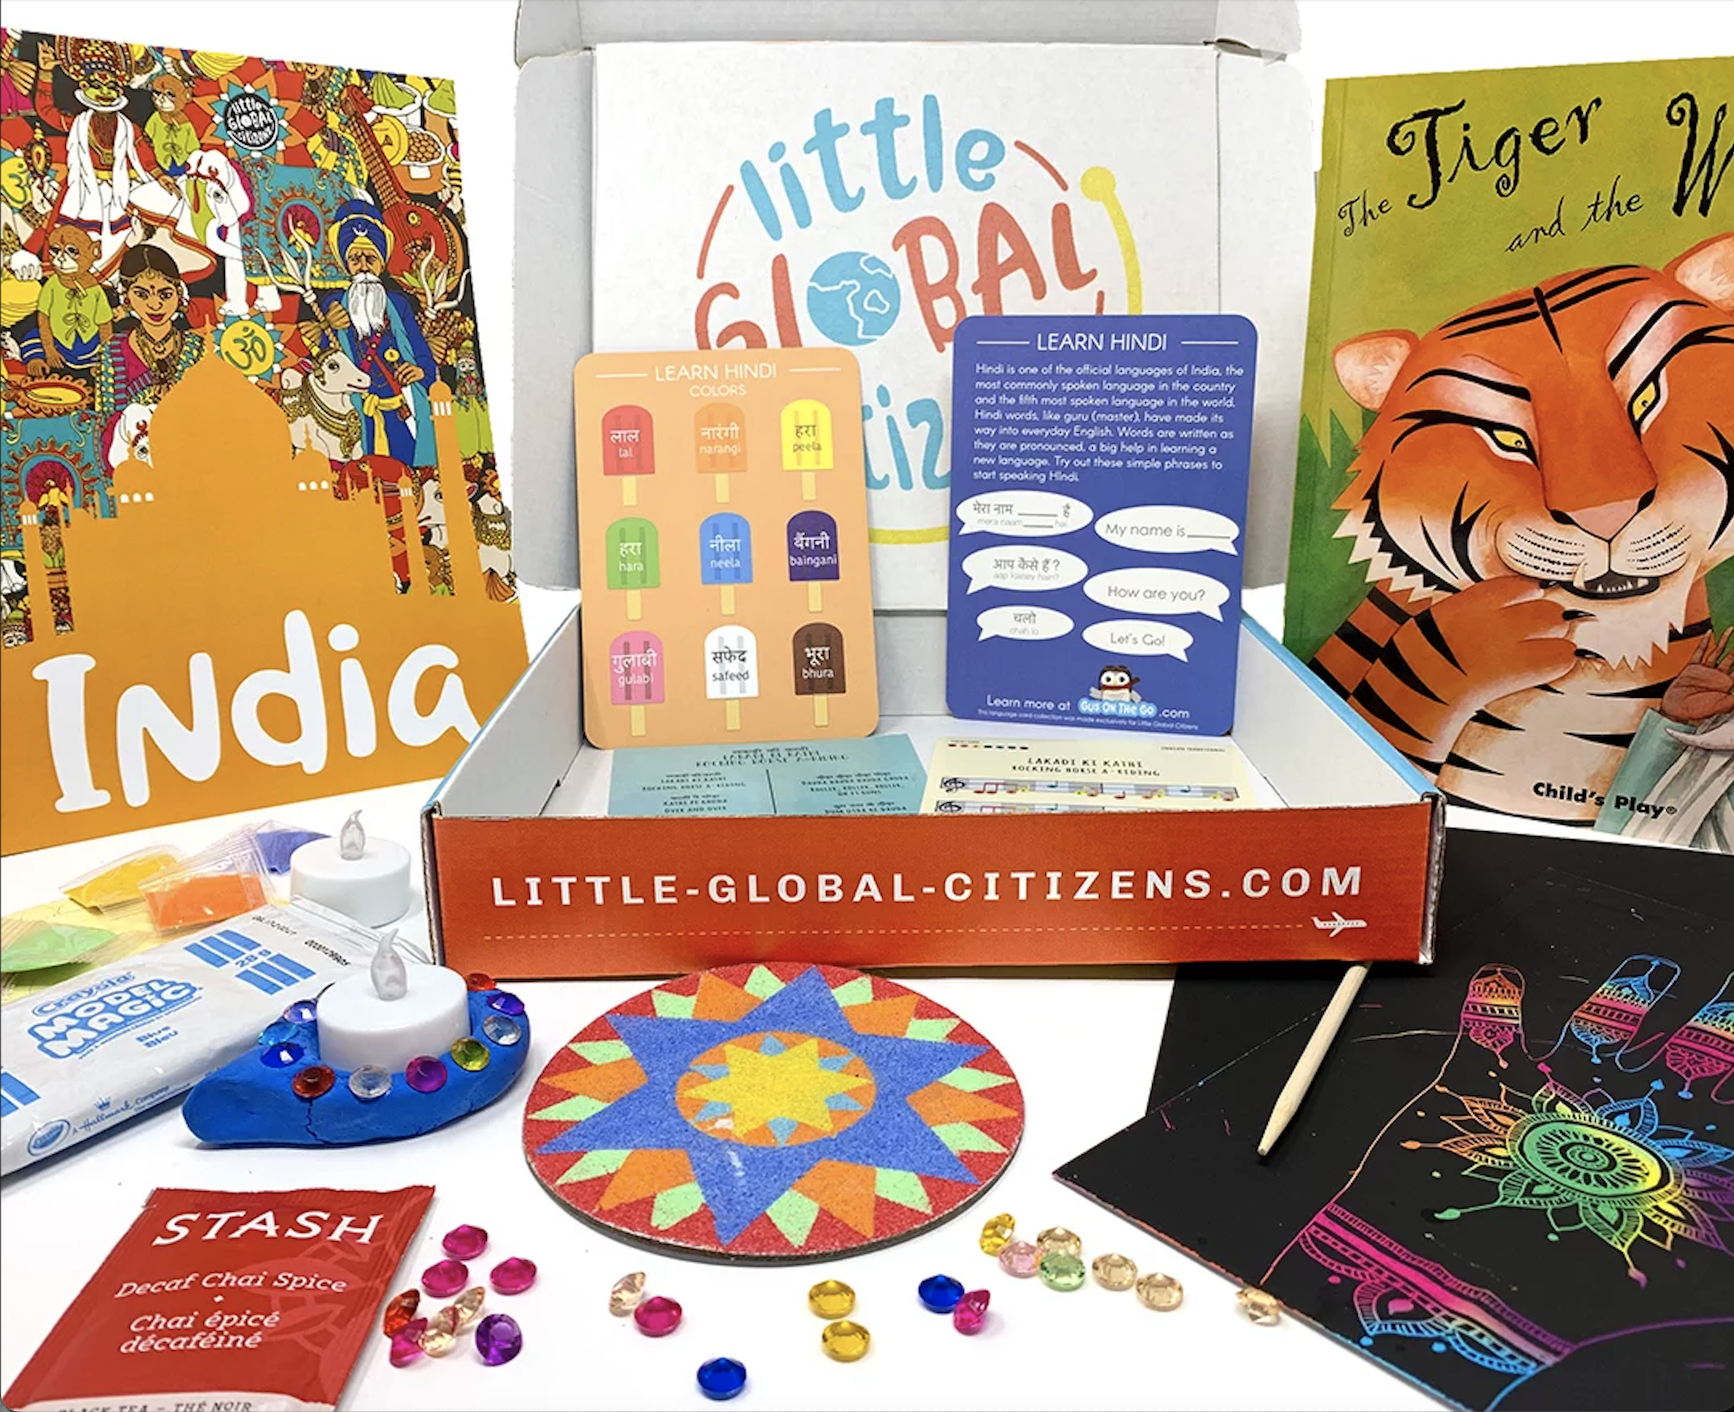 subscription box contents with a focus on India